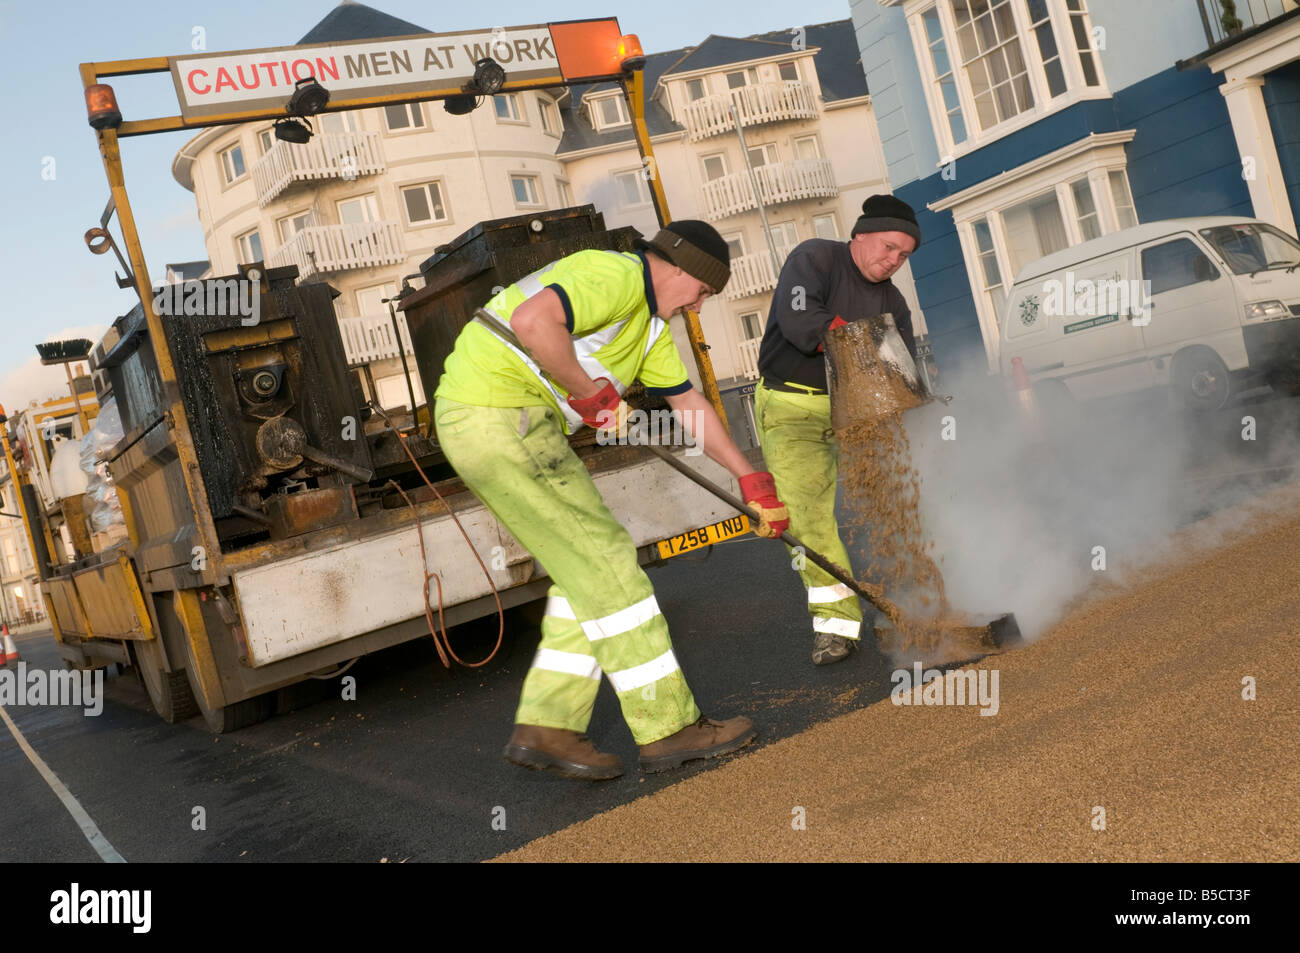 Two men laying high friction anti skid resistant road surface 'caution men at work', Aberystwyth Wales UK Stock Photo